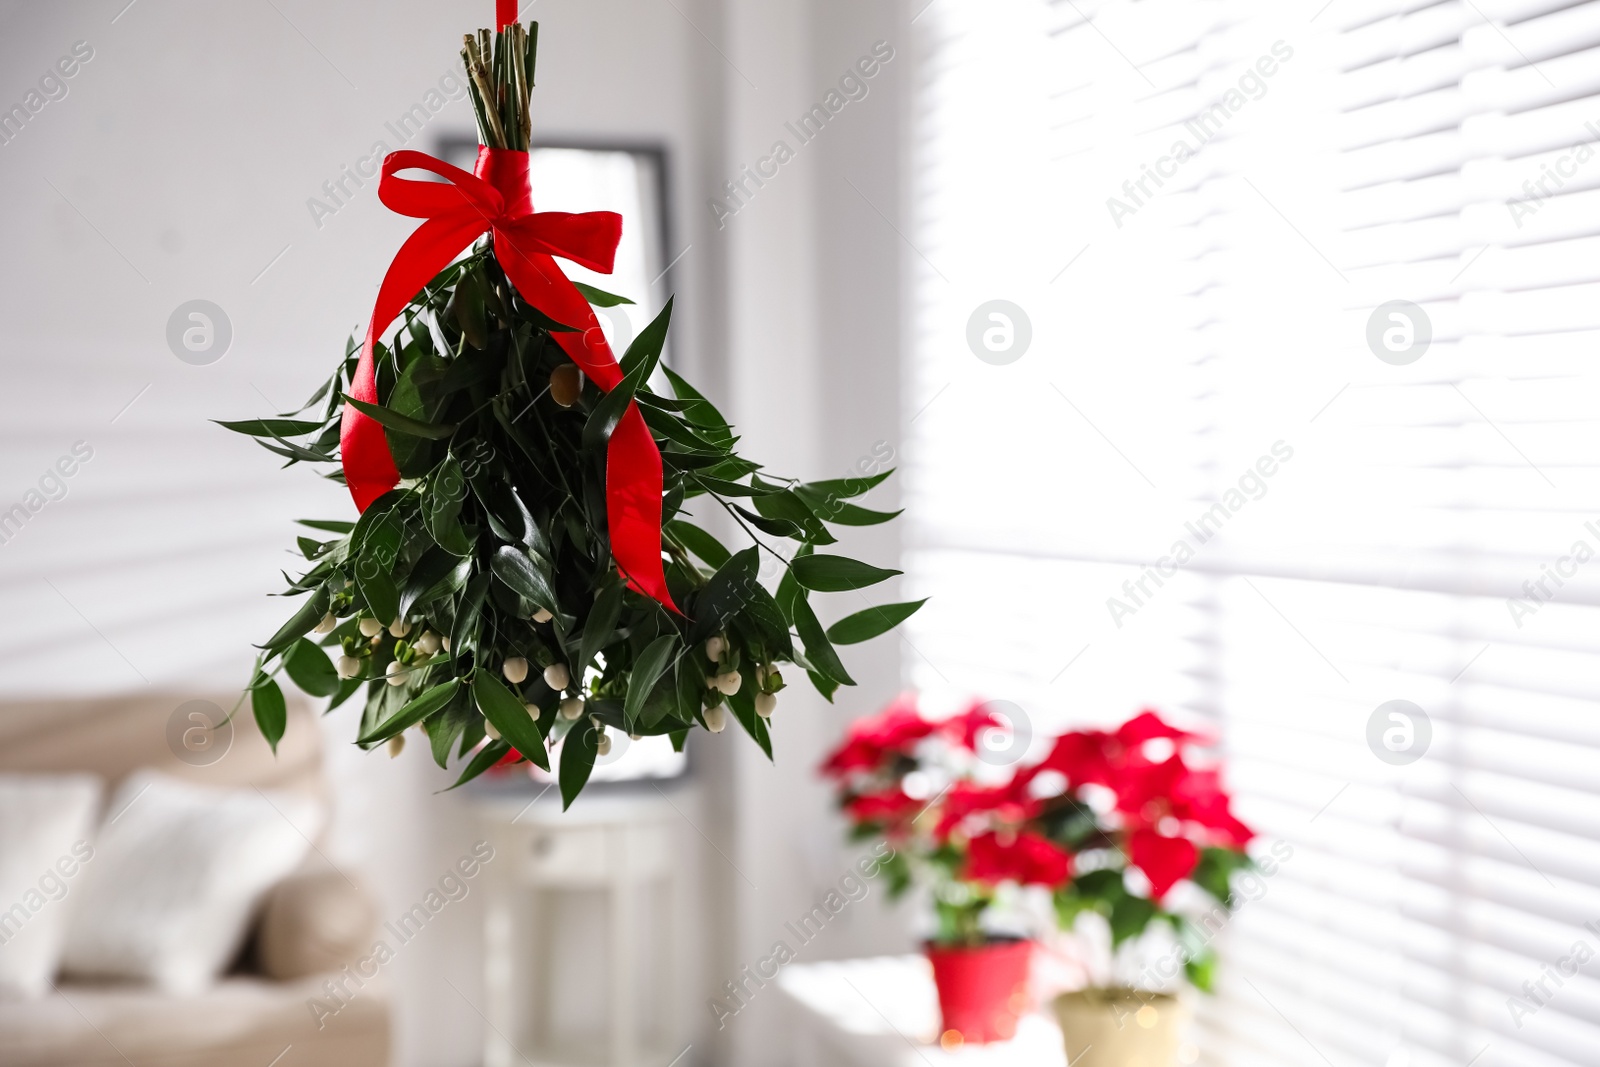 Photo of Mistletoe bunch with red bow hanging indoors, space for text. Traditional Christmas decor